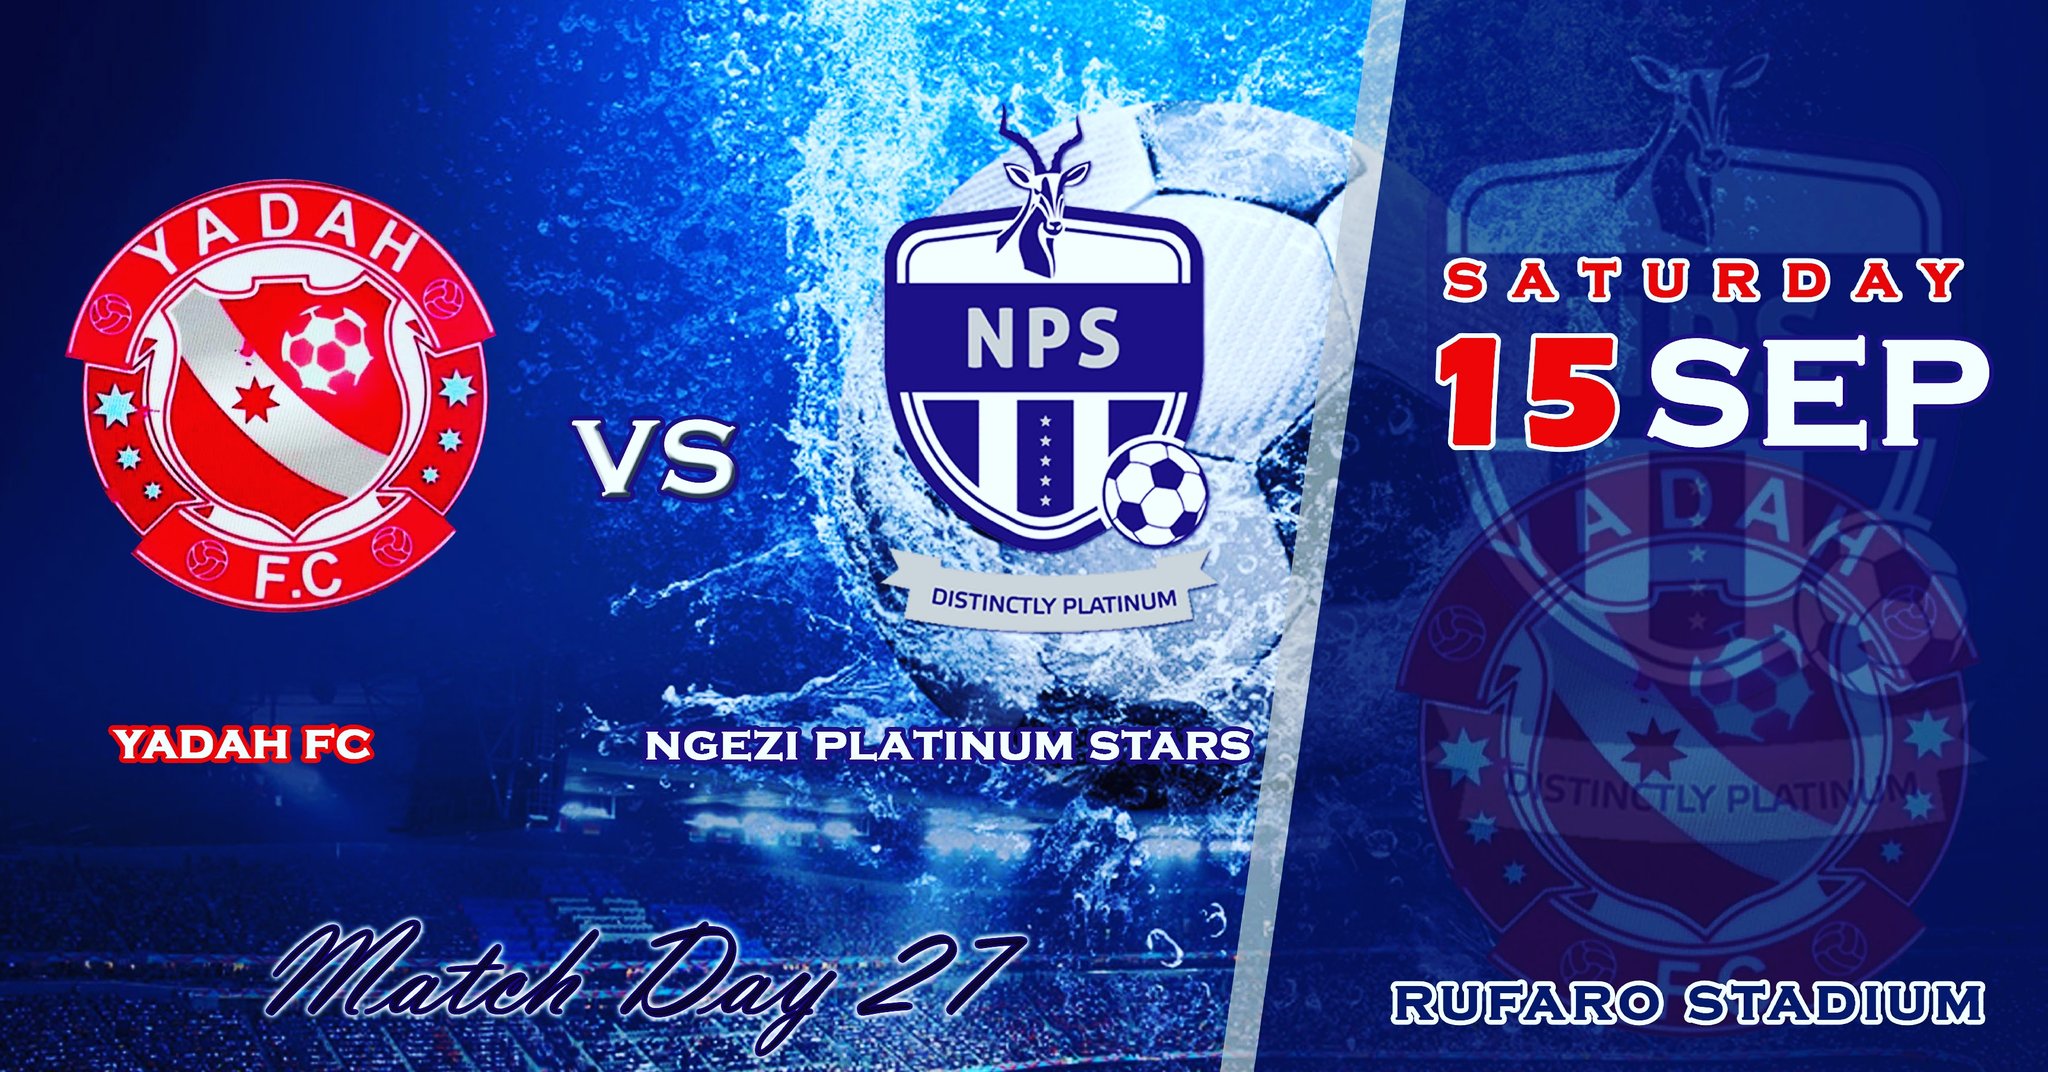 Ngezi Platinum Stars Football Club on Twitter: "MATCH DAY 27 The journey  continues as our Dinstinctly Platinum Lads travel to Harare to face YADAH.  We wish the Lads a fruitful hunt. #markofachampion